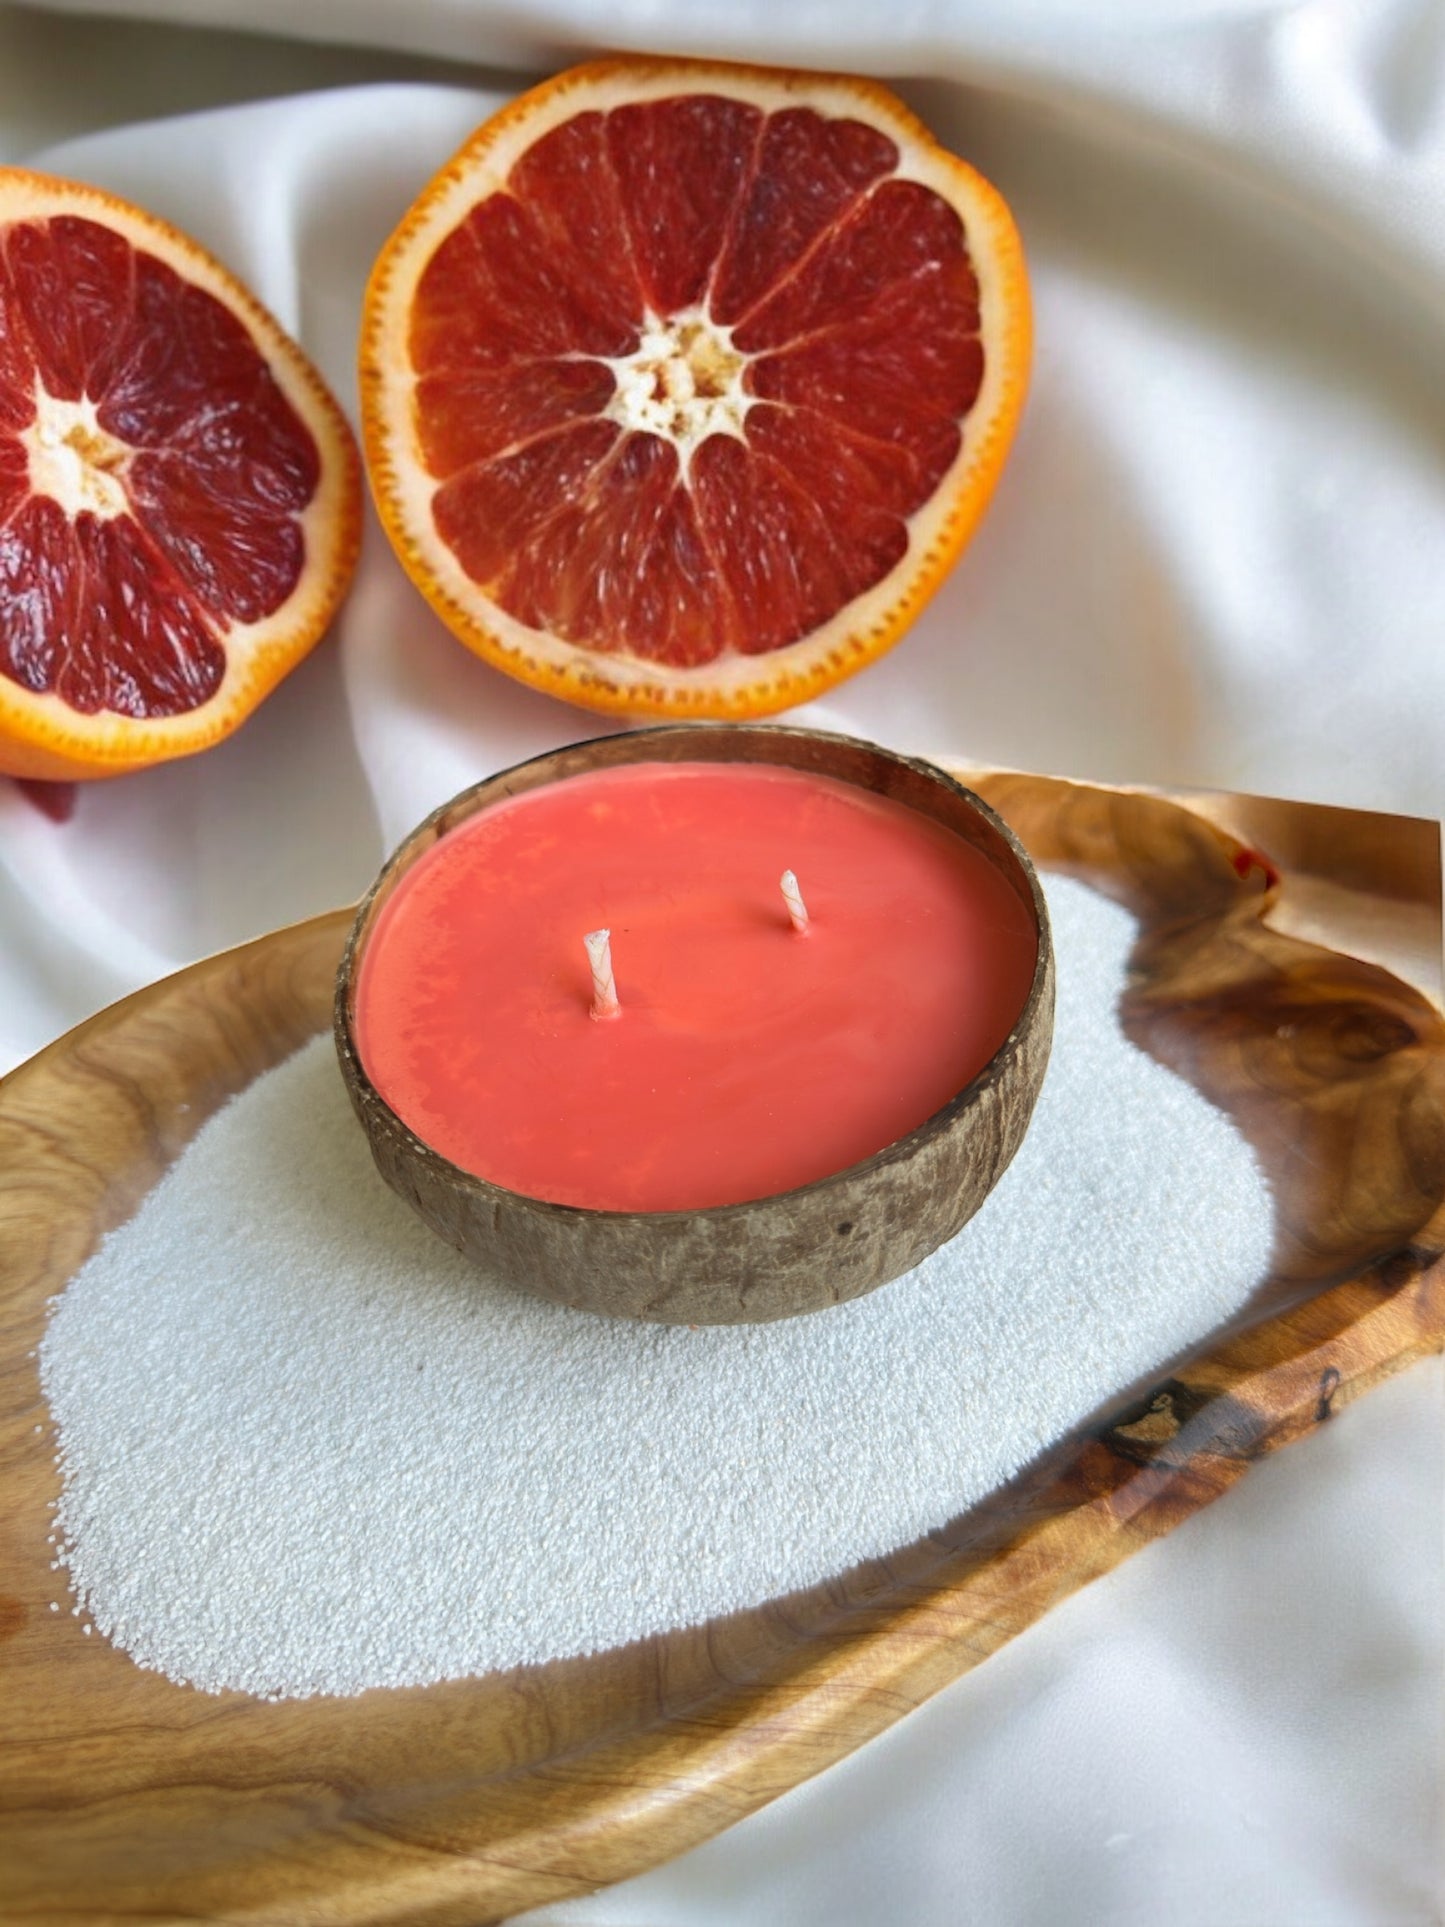 Coco Candle | Enlightened- hand poured soy and coconut wax candle in a reusable natural coconut shell